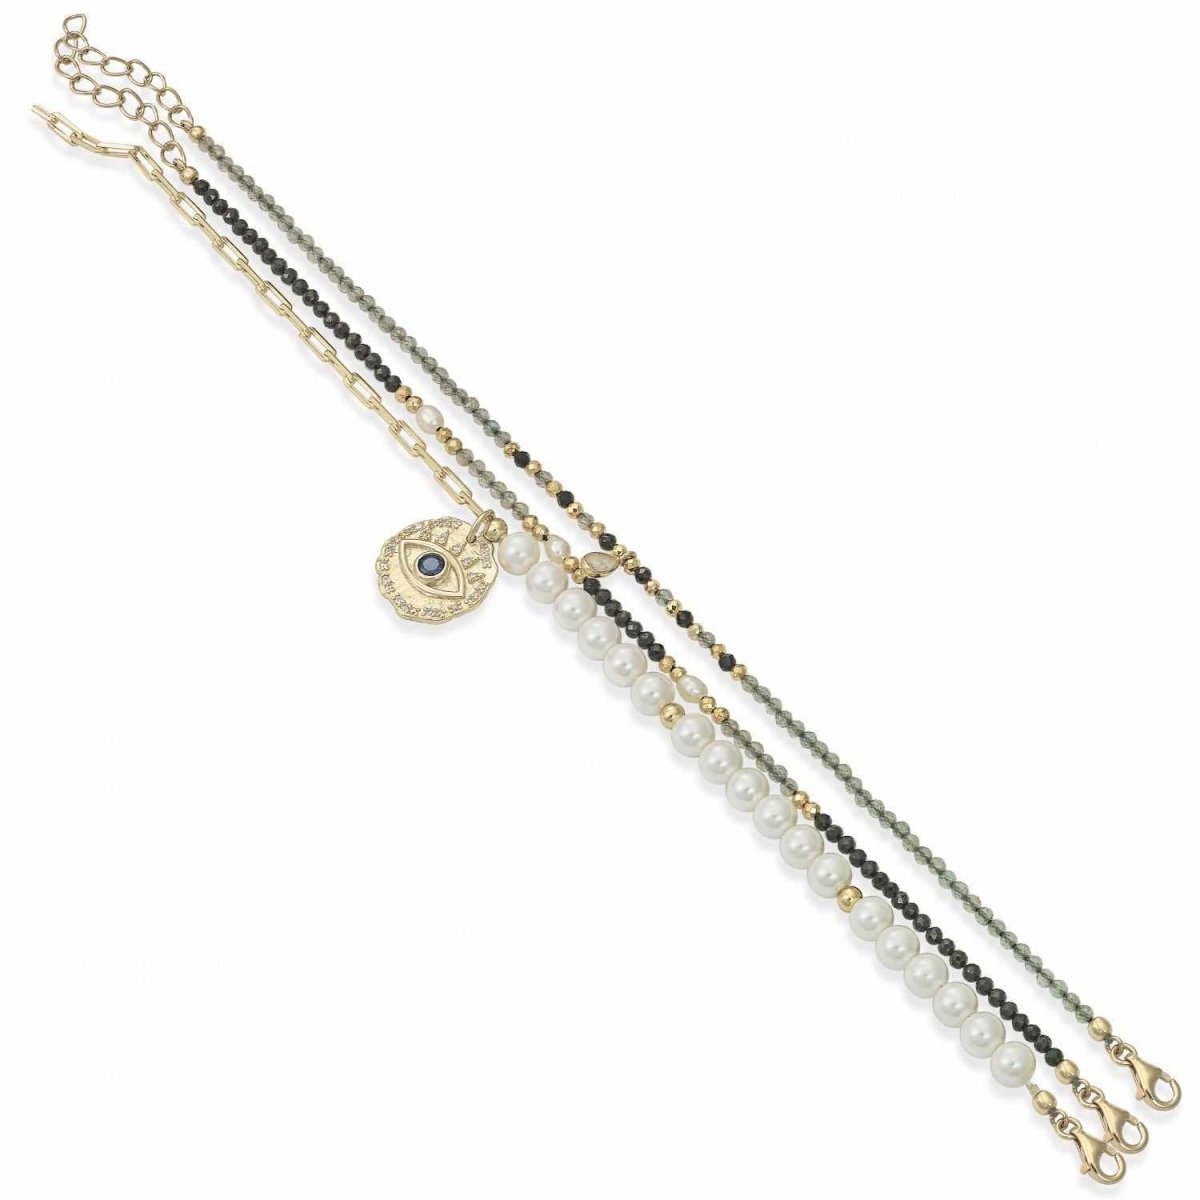 Bracelet - Thin bracelets with pearl beads and medal design